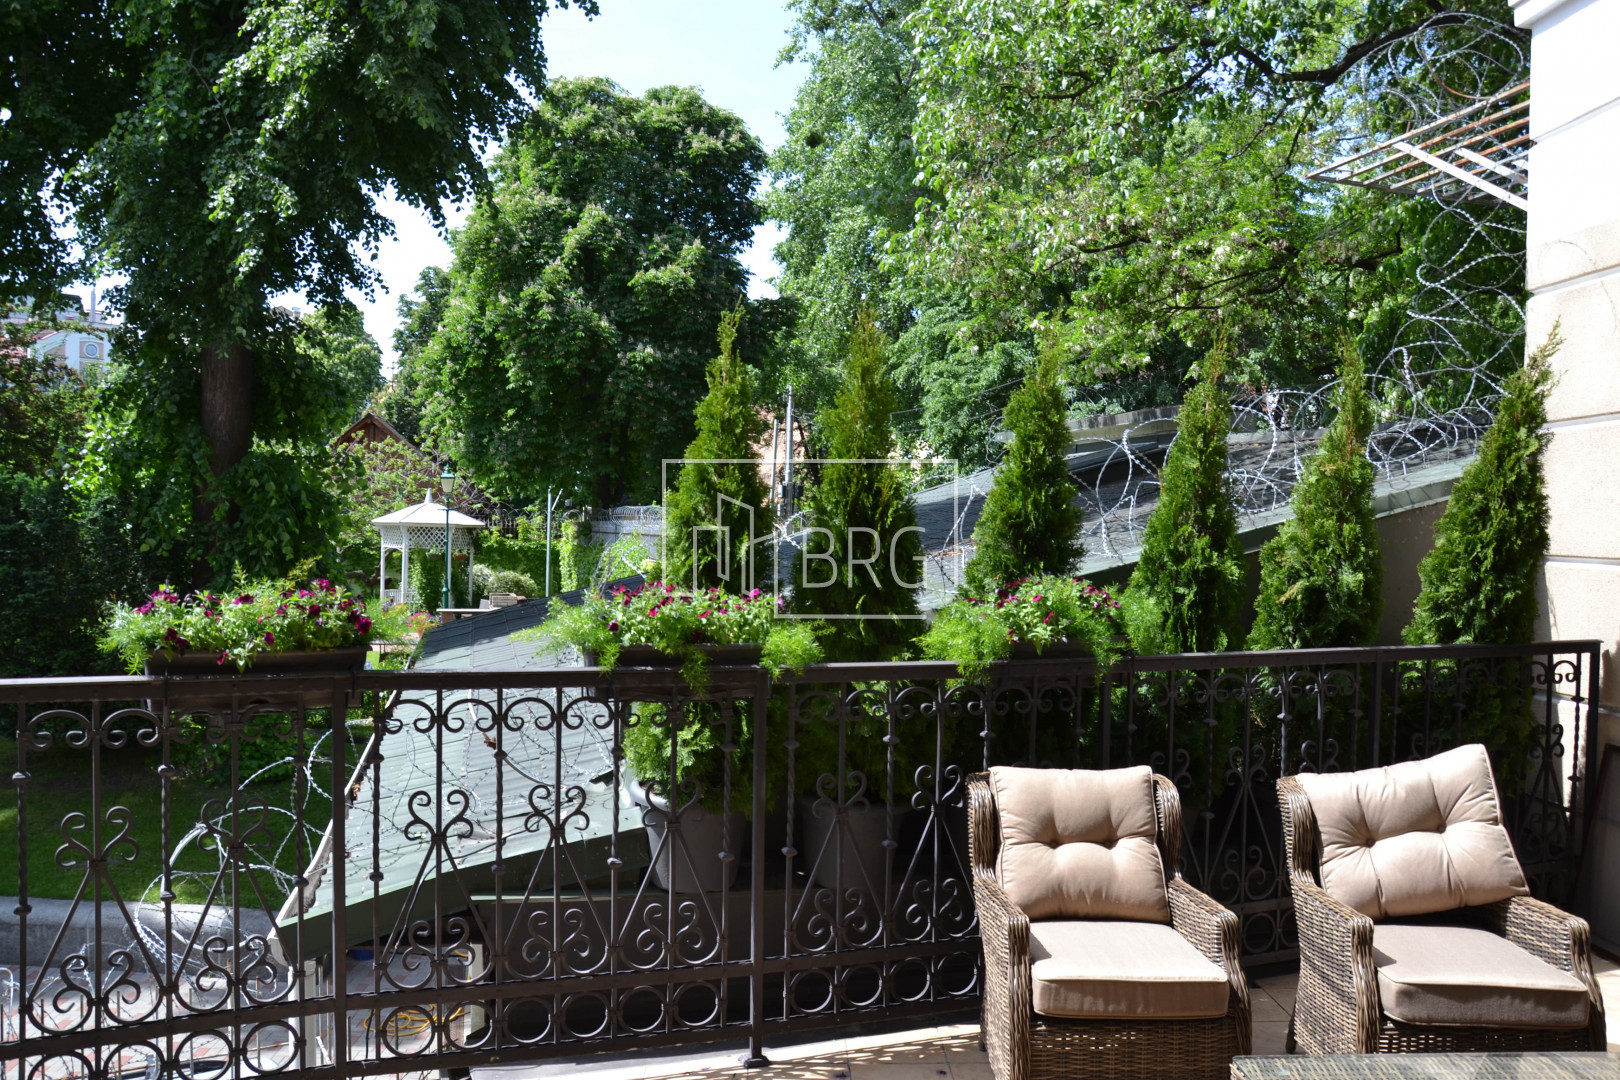 Sale 4-room apartment with a terrace in the center of Shevchenko district. Kiev